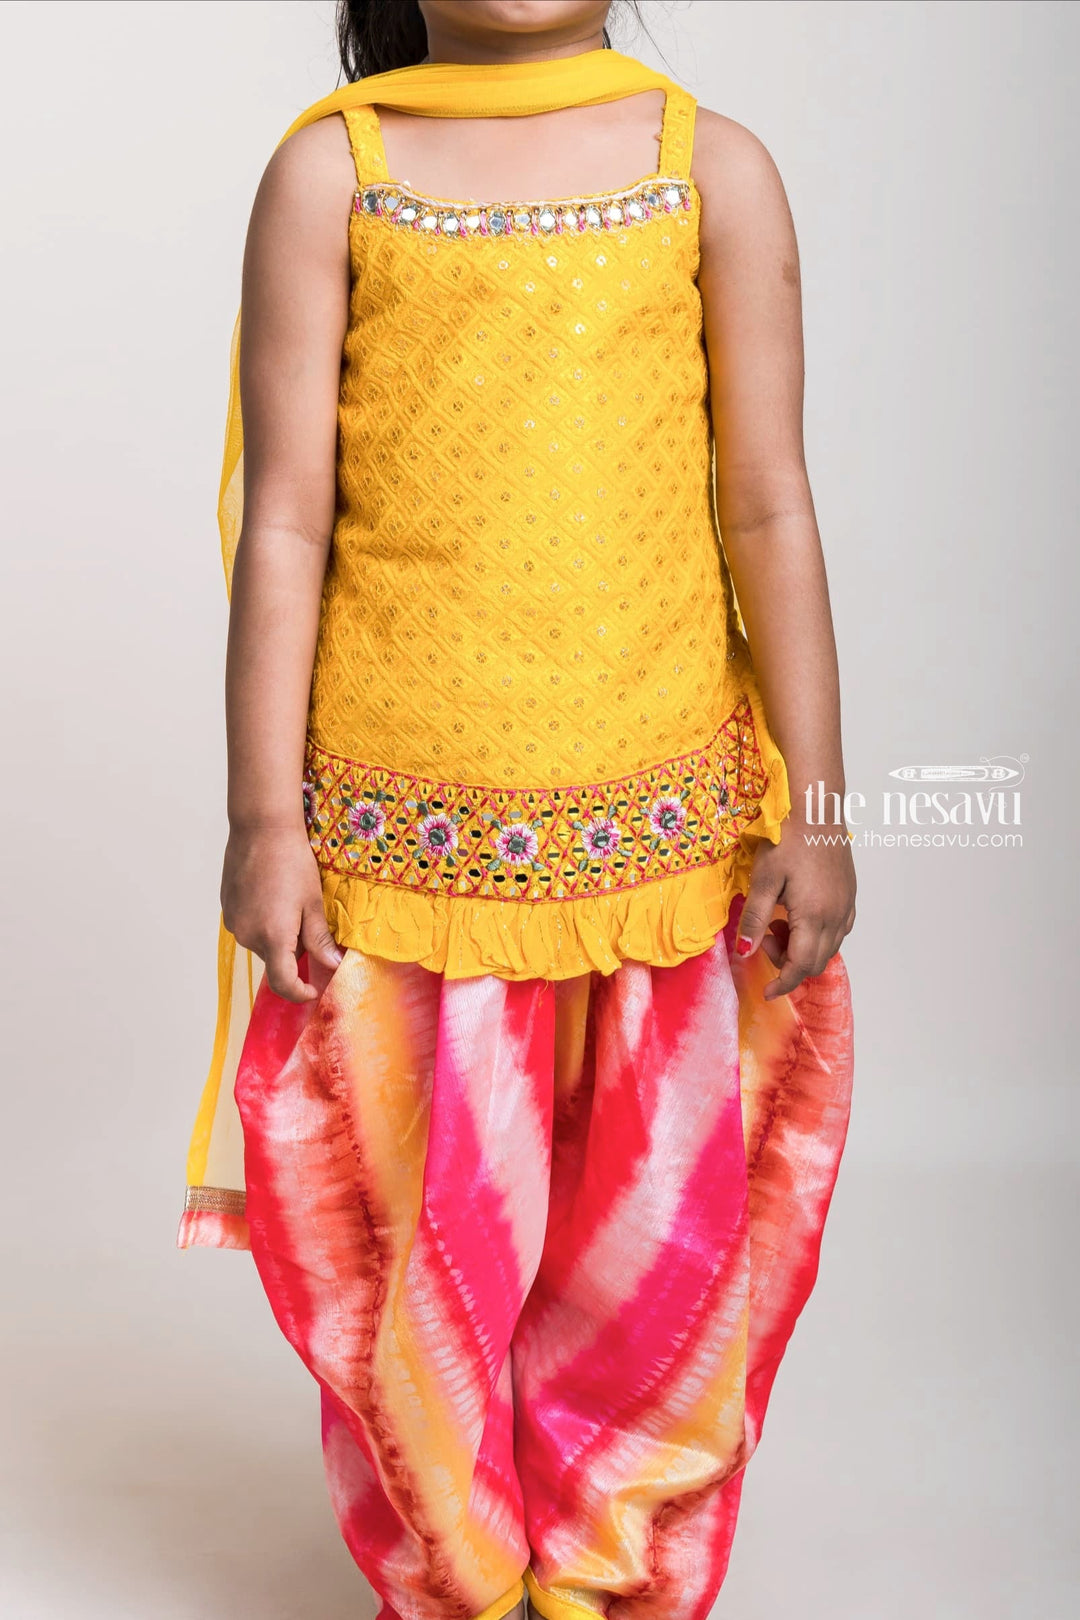 The Nesavu Girls Dothi Sets Yellow Sequenced Top With Tie And Dyed Patiala Pants For Girls Nesavu Vibrant Yellow Short Tops And Patiala Pants| Latest Design| The Nesavu